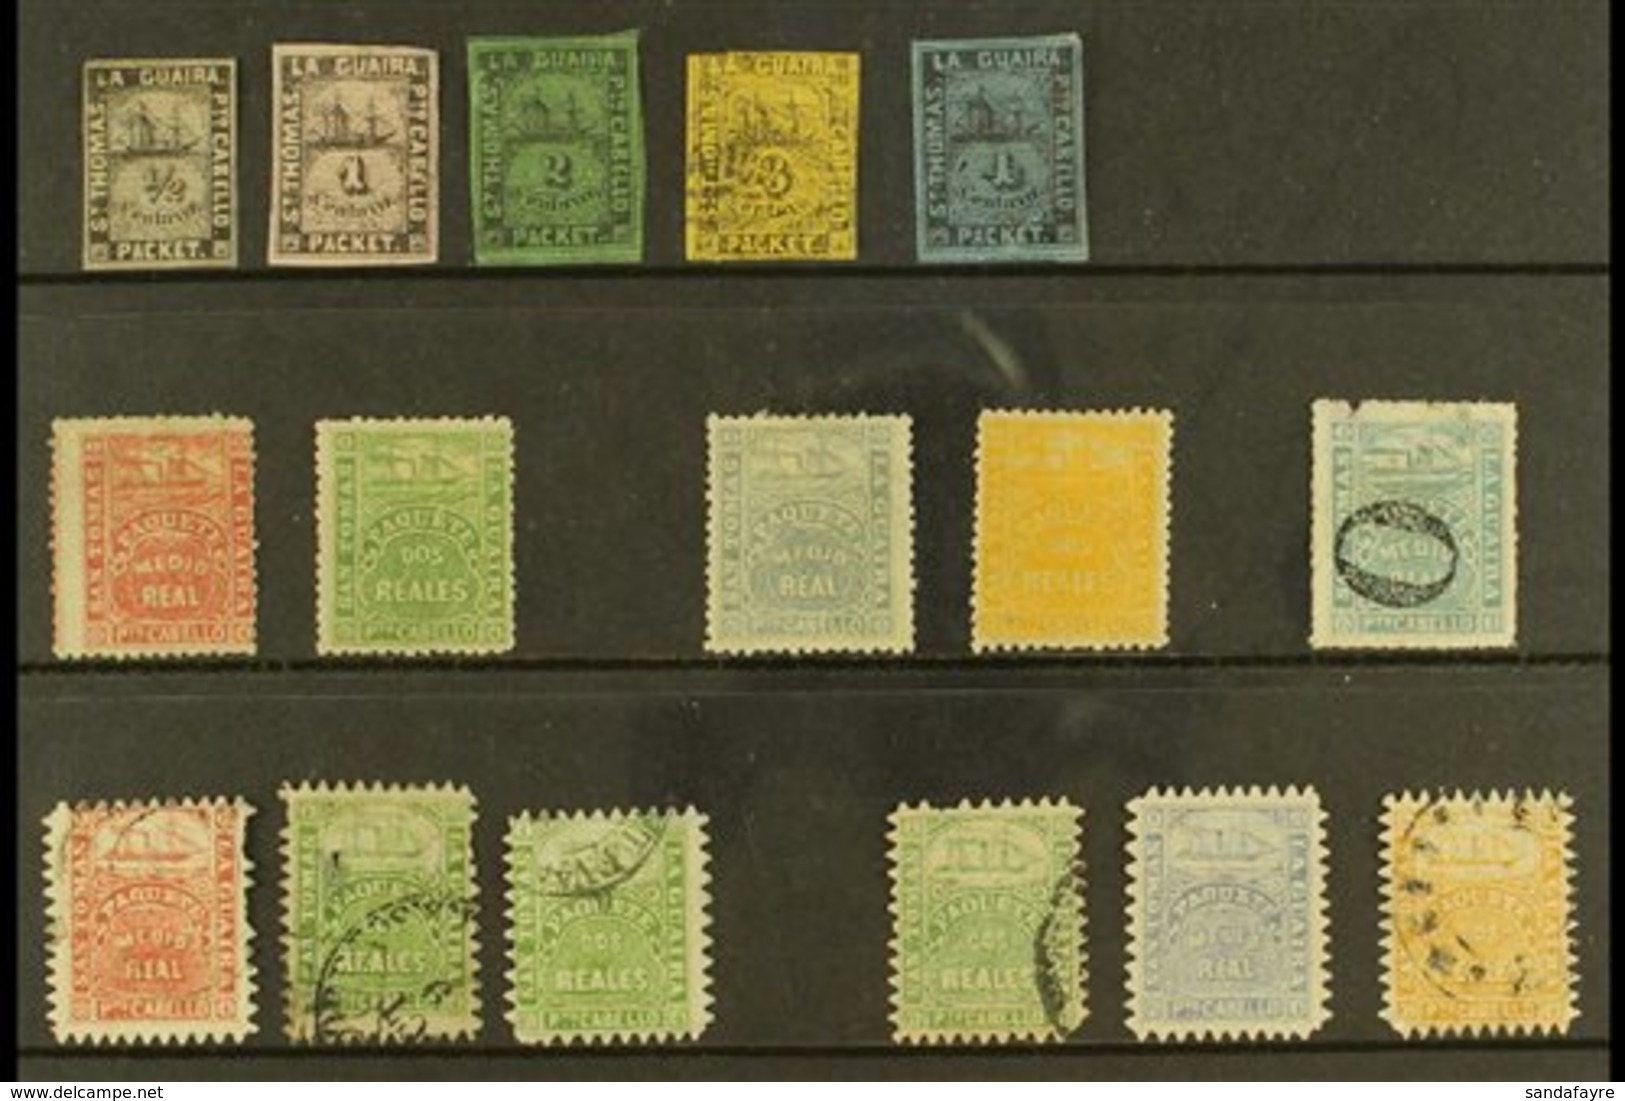 LA GUIARA LOCALS 1864-70 UNUSED & USED COLLECTION. Includes 1864-69 Imperf Set Of All Values, The ½c & 1c With Lines Acr - Venezuela